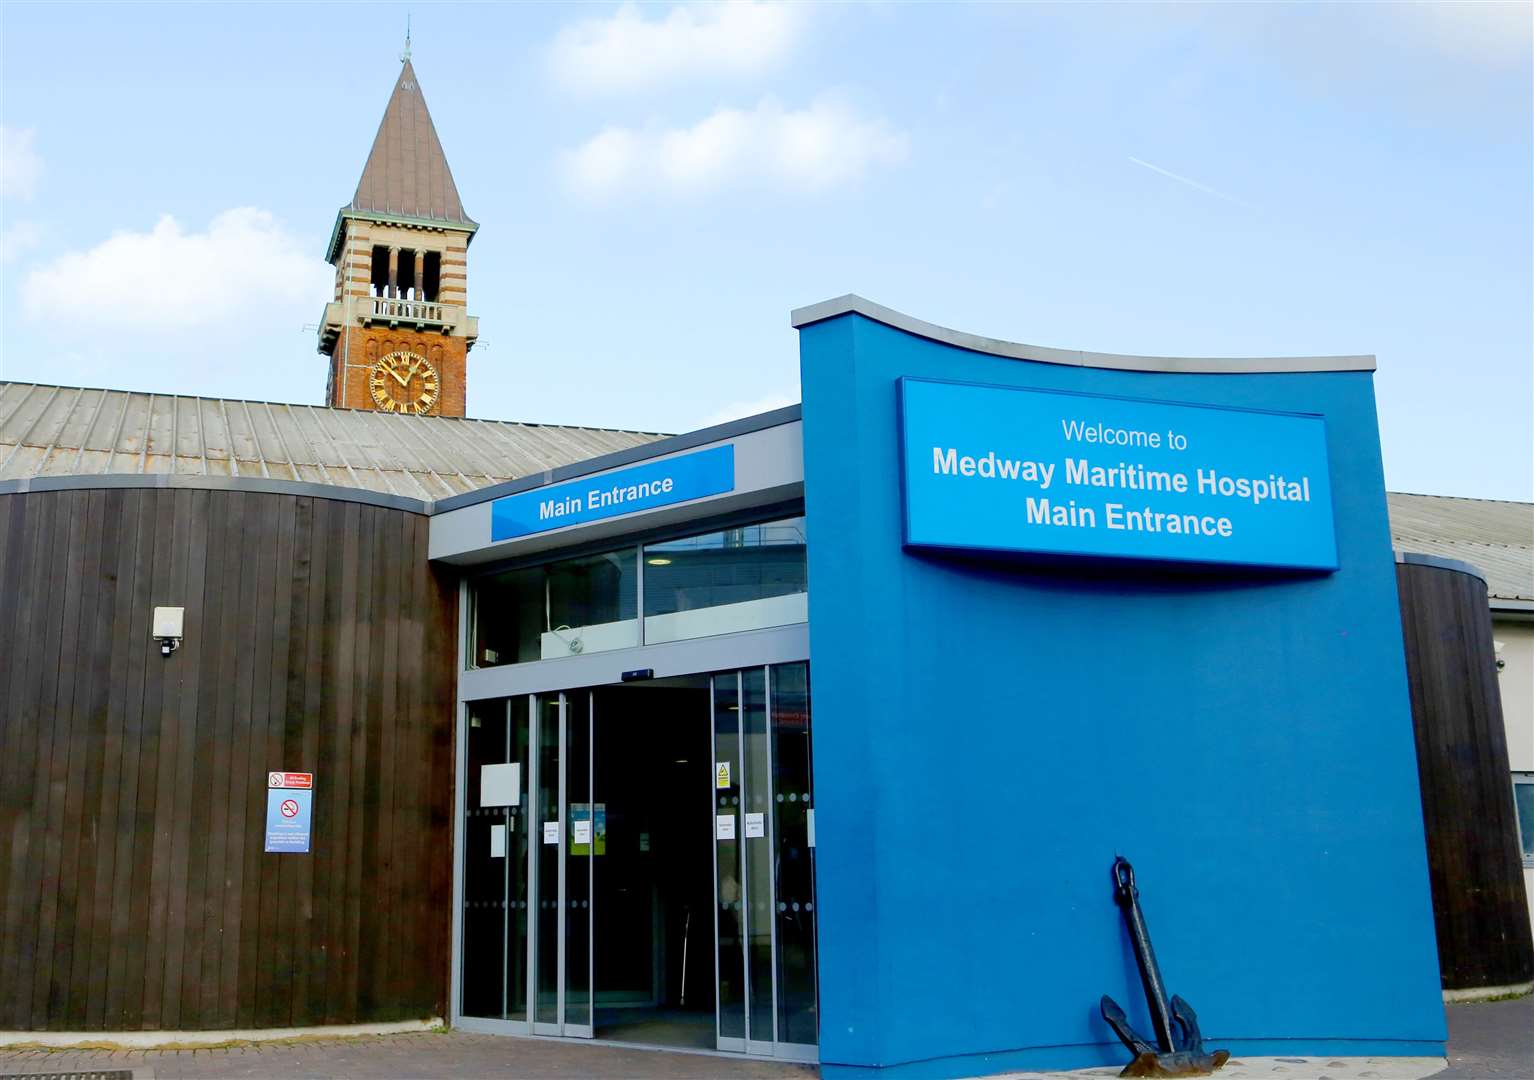 The search for a new permanent chief executive at Medway Maritime Hospital is ongoing